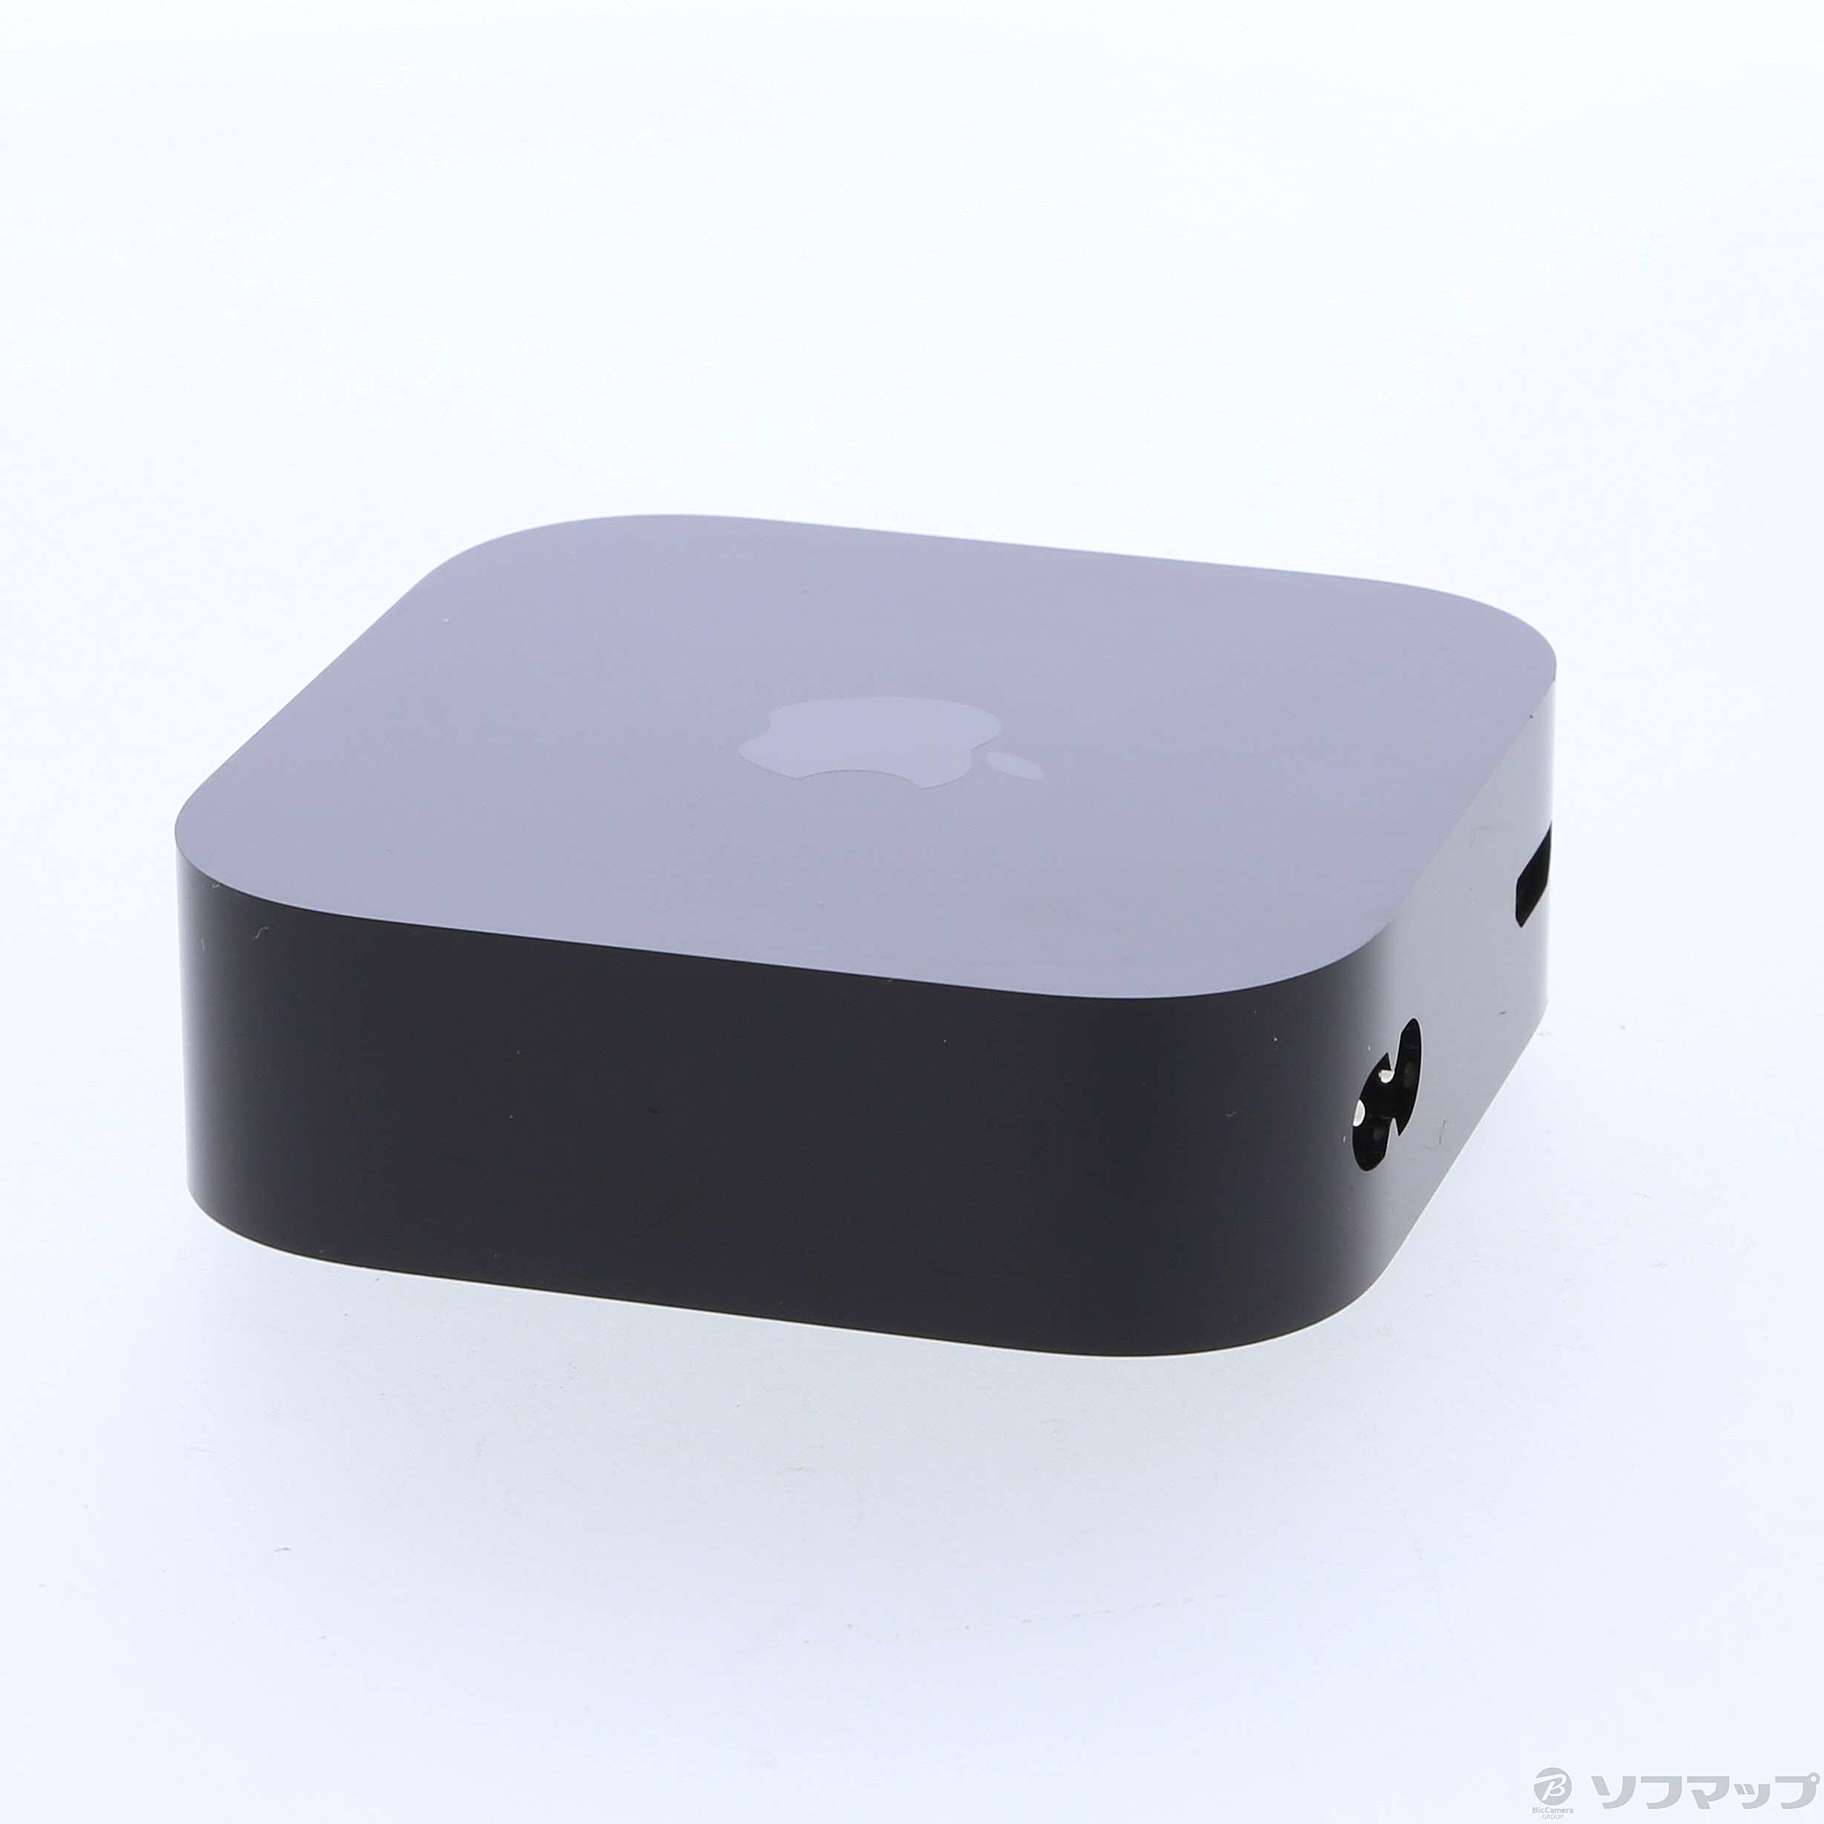 中古】Apple TV 4K 第3世代 64GB Wi-Fiモデル MN873J／A